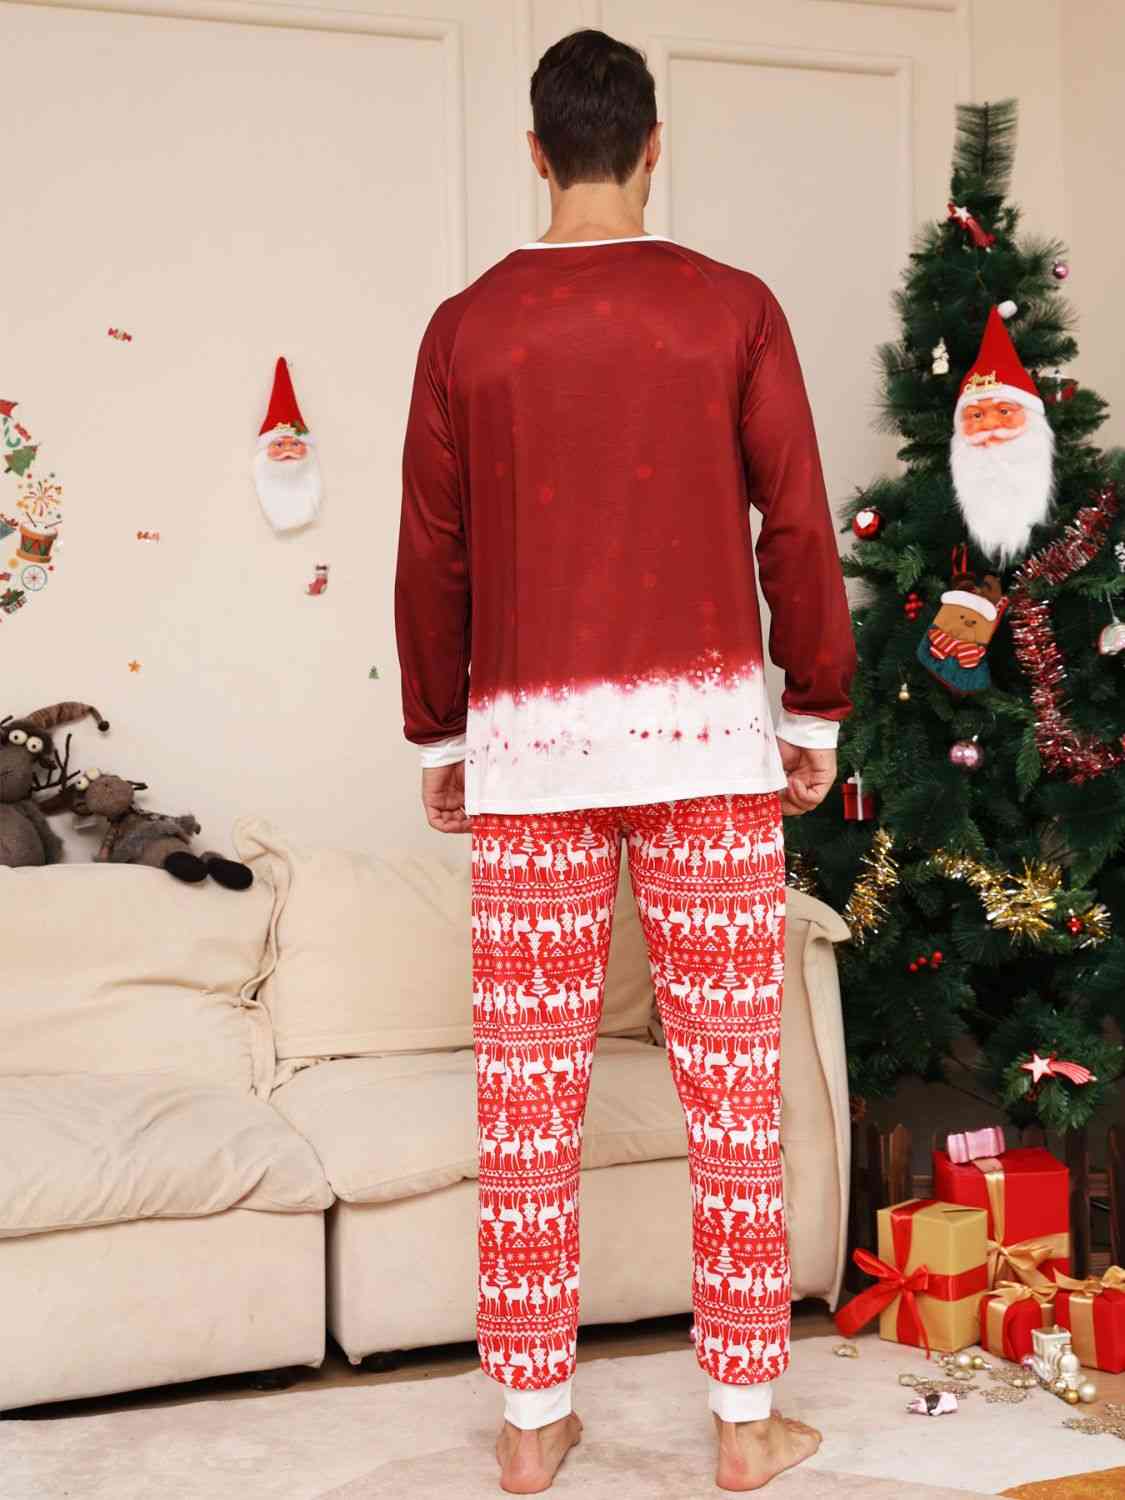 Full Size Snowman Top and Pants Set - Kawaii Stop - Basic Style, Celebrate, Christmas, Christmas Set, Christmas Spirit, Comfortable, Cozy, Easy Care, Festive Attire, Festive Wear, Holiday Cheer, Premium Material, Ship From Overseas, Snowman Design, Two-Piece Set, Women's Clothing, Z.Y@